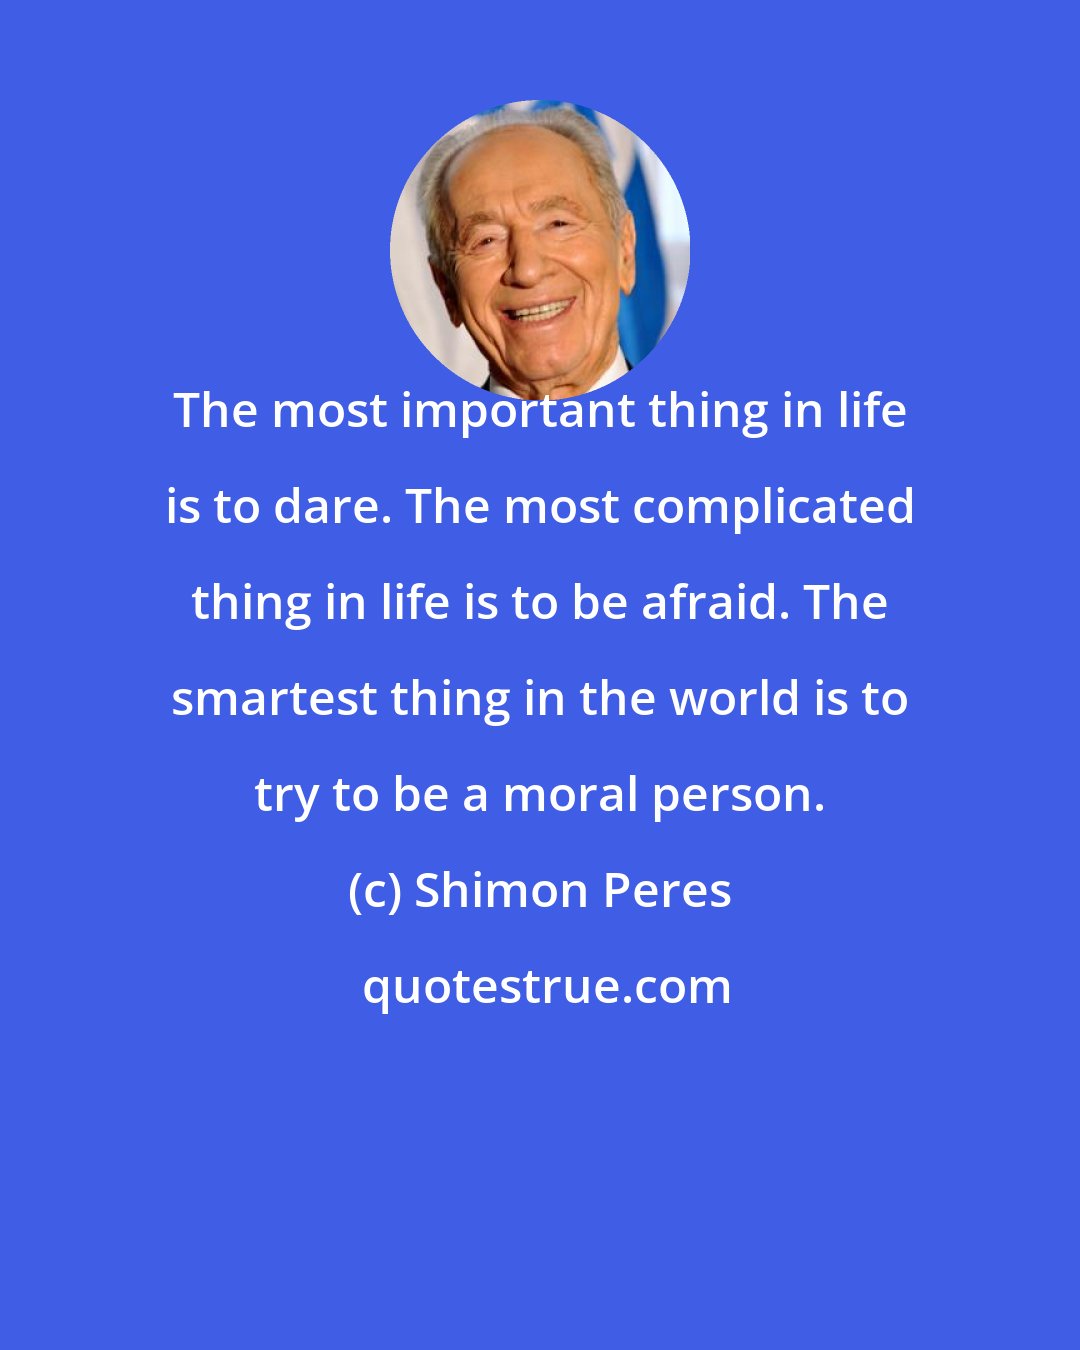 Shimon Peres: The most important thing in life is to dare. The most complicated thing in life is to be afraid. The smartest thing in the world is to try to be a moral person.